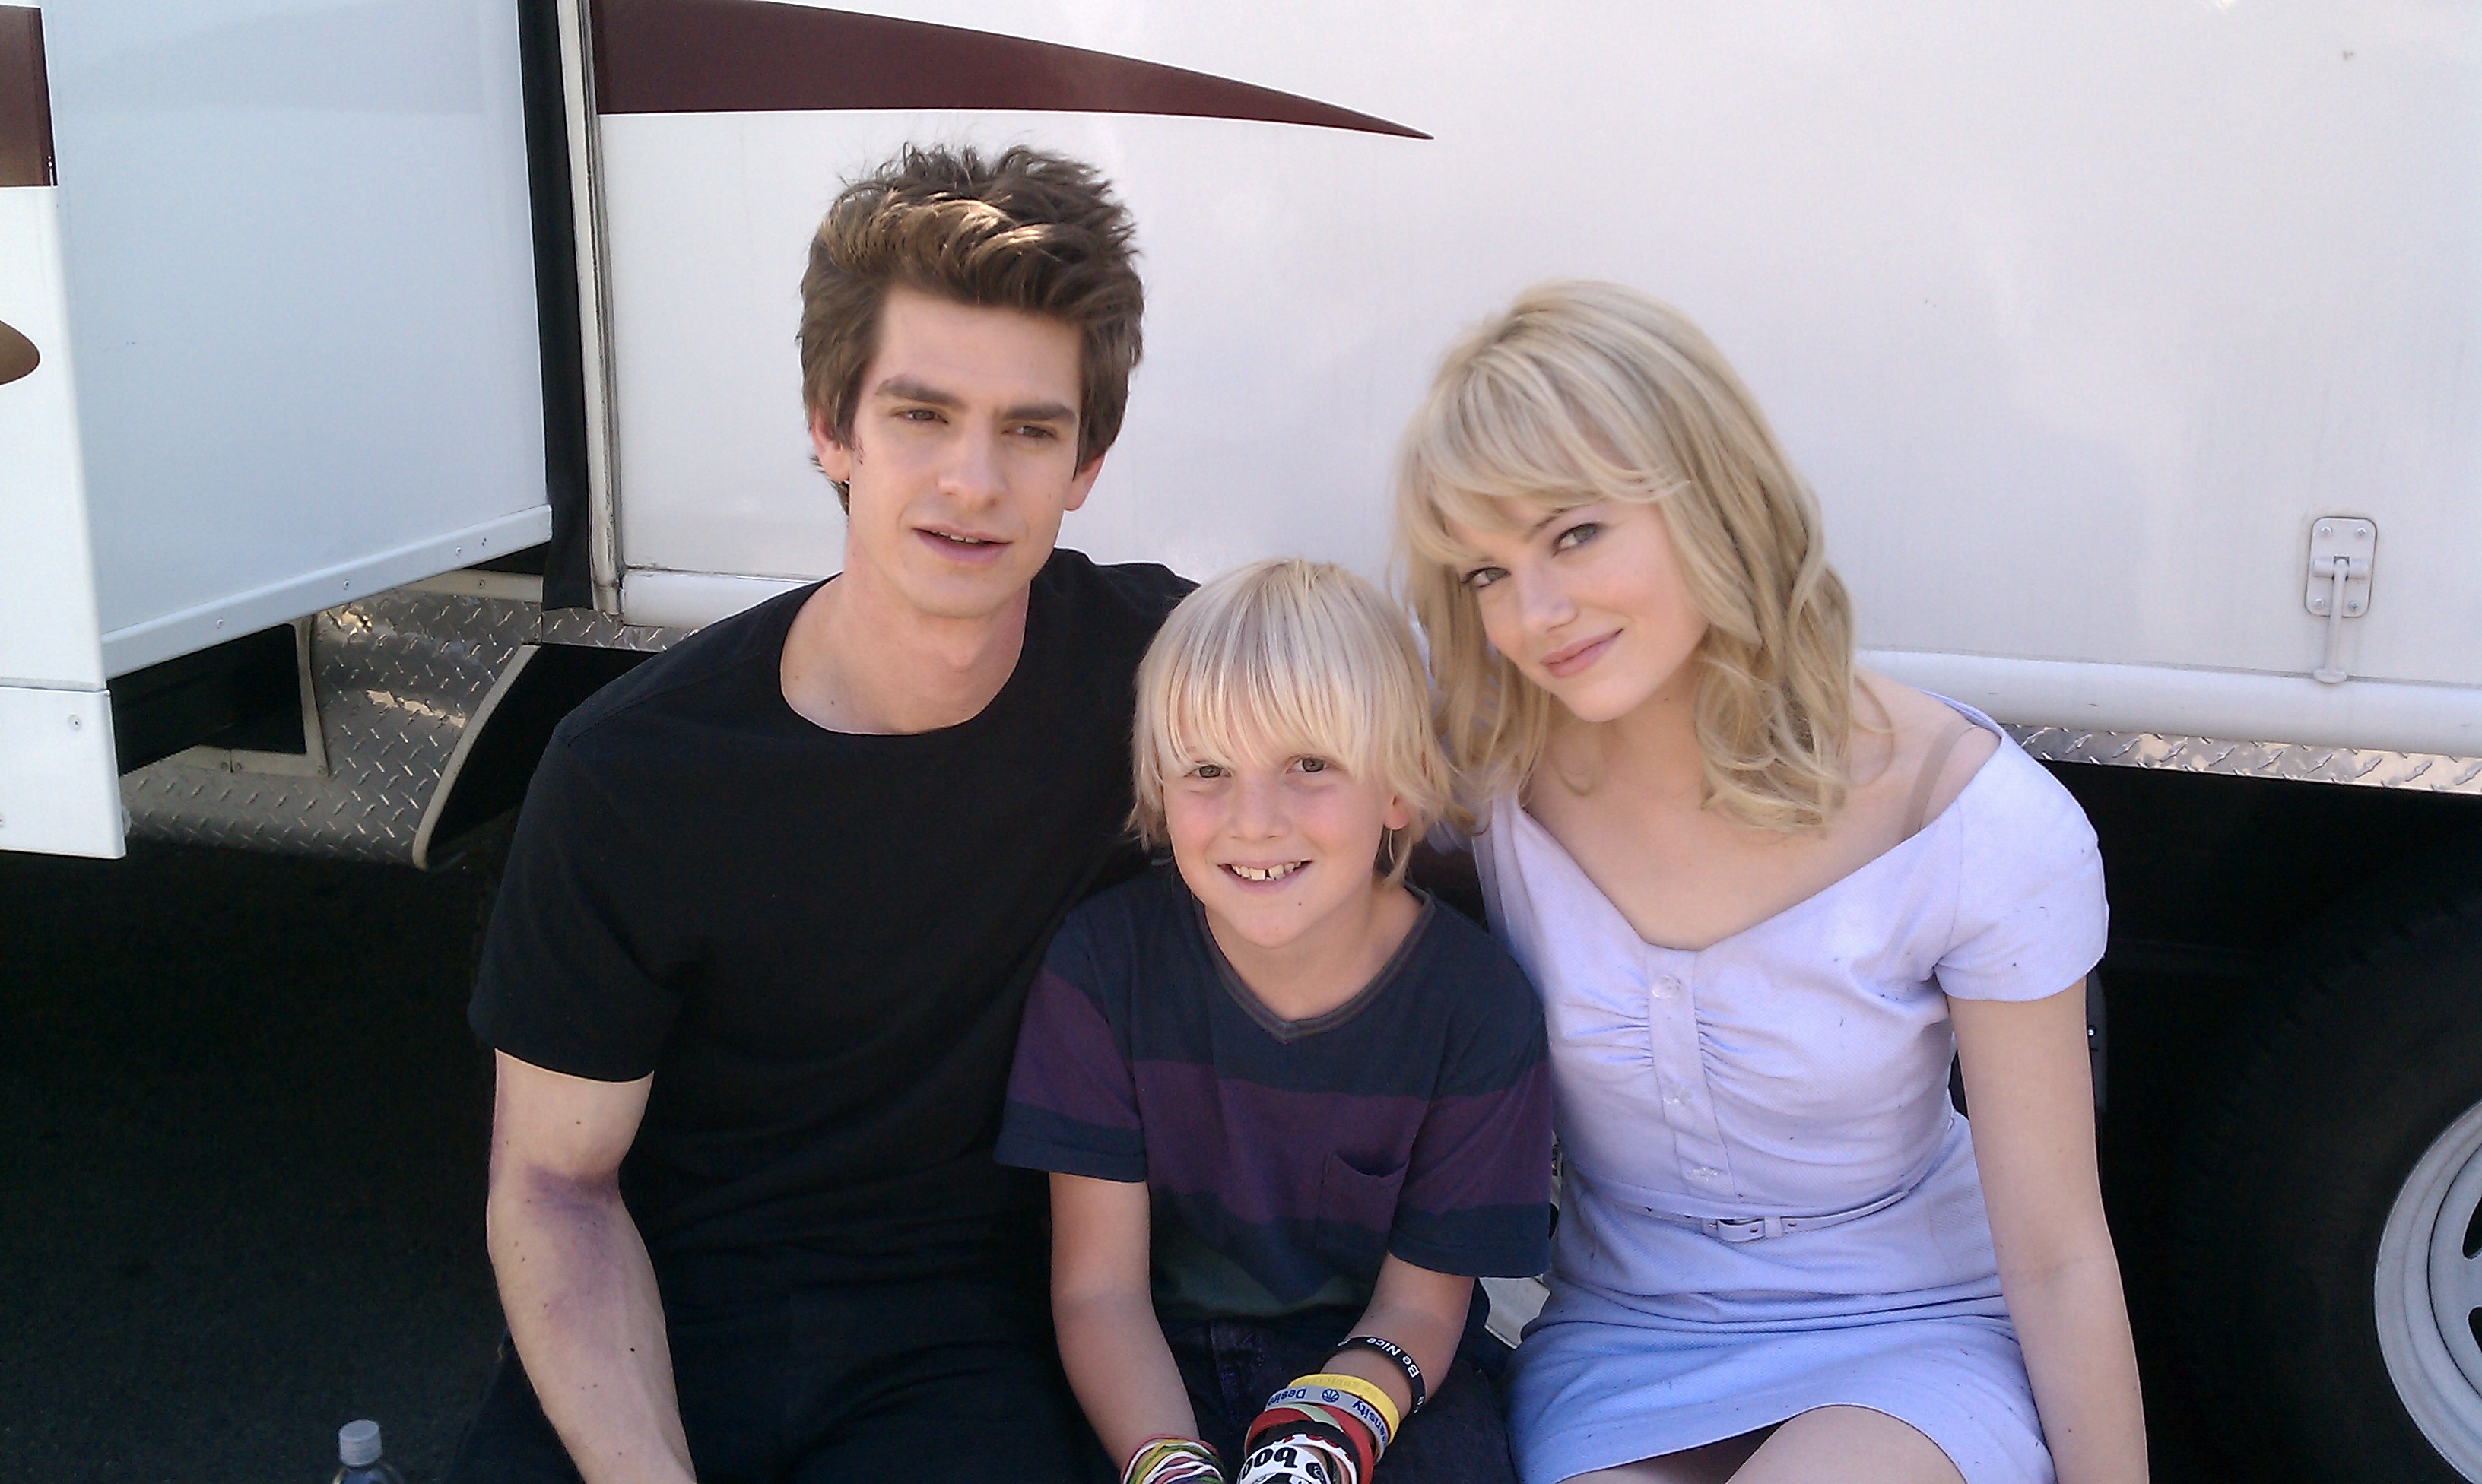 Miles Elliot during The Amazing Spiderman w/ Andrew Garfield and Emma Stone taking a break on the Sony lot.